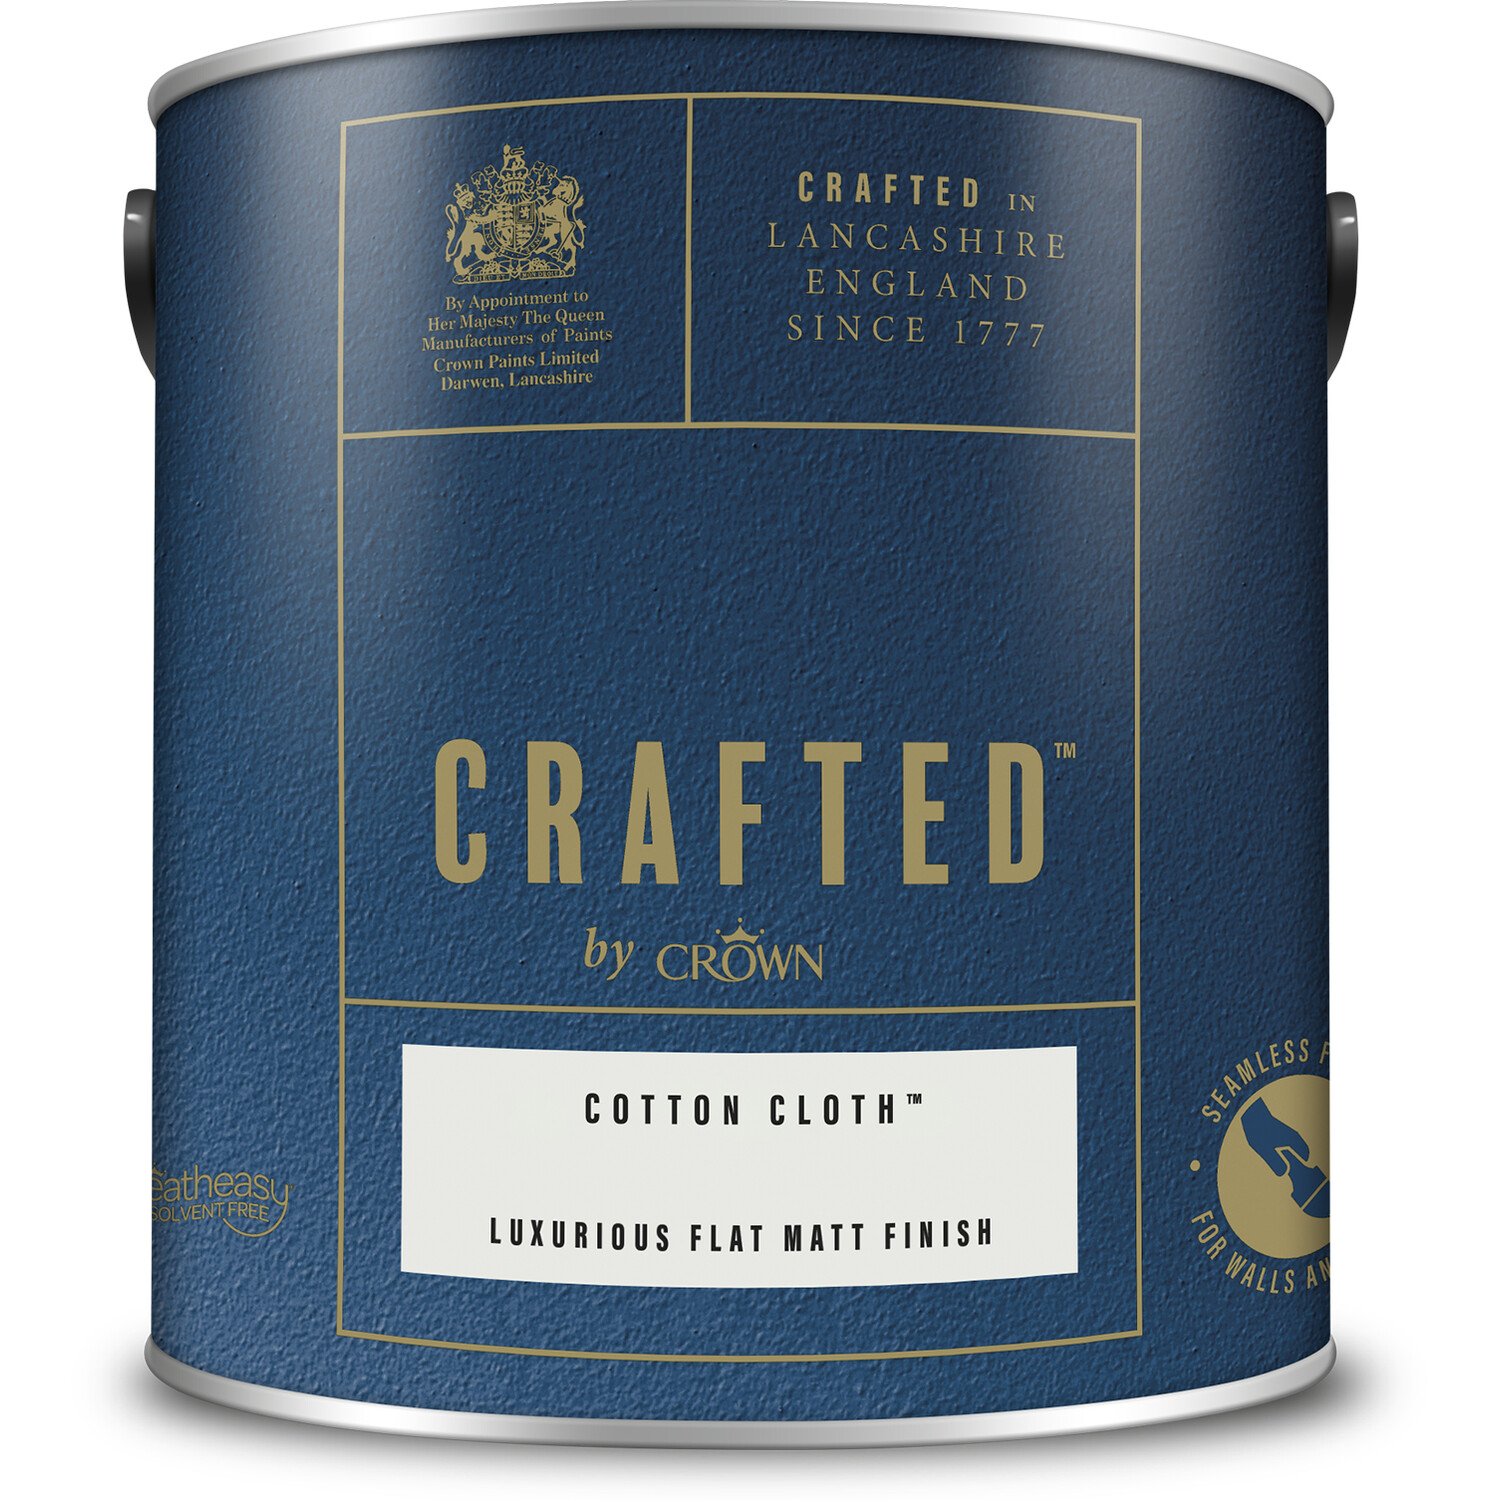 Crown Crafted Walls and Wood Cotton Cloth Luxurious Flat Matt Paint 2.5L Image 2